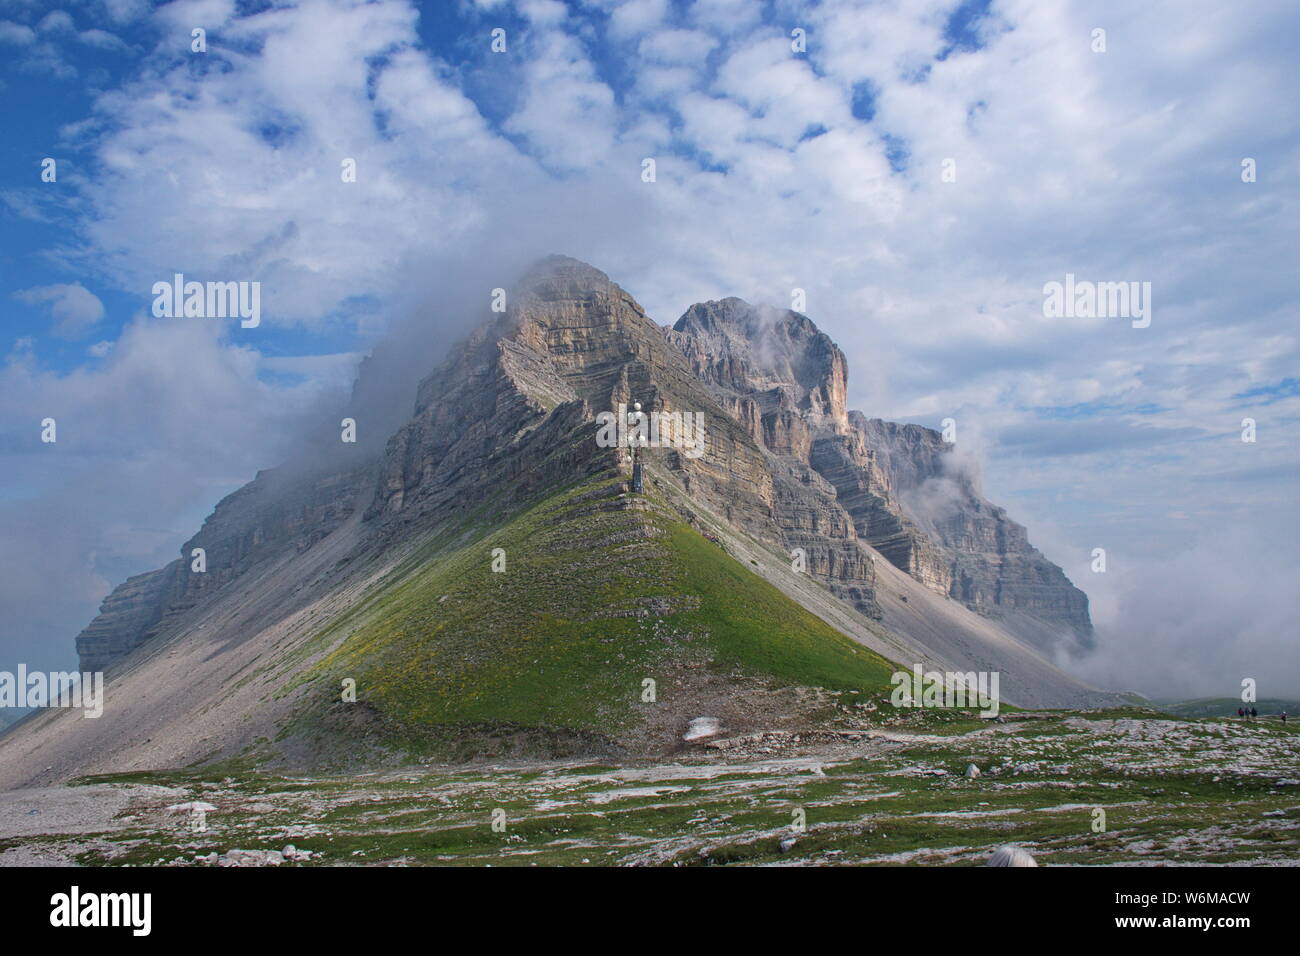 Scenic landscape of Dolomites mountains in Italy. Brenta Dolomites and it's rocky environment Stock Photo